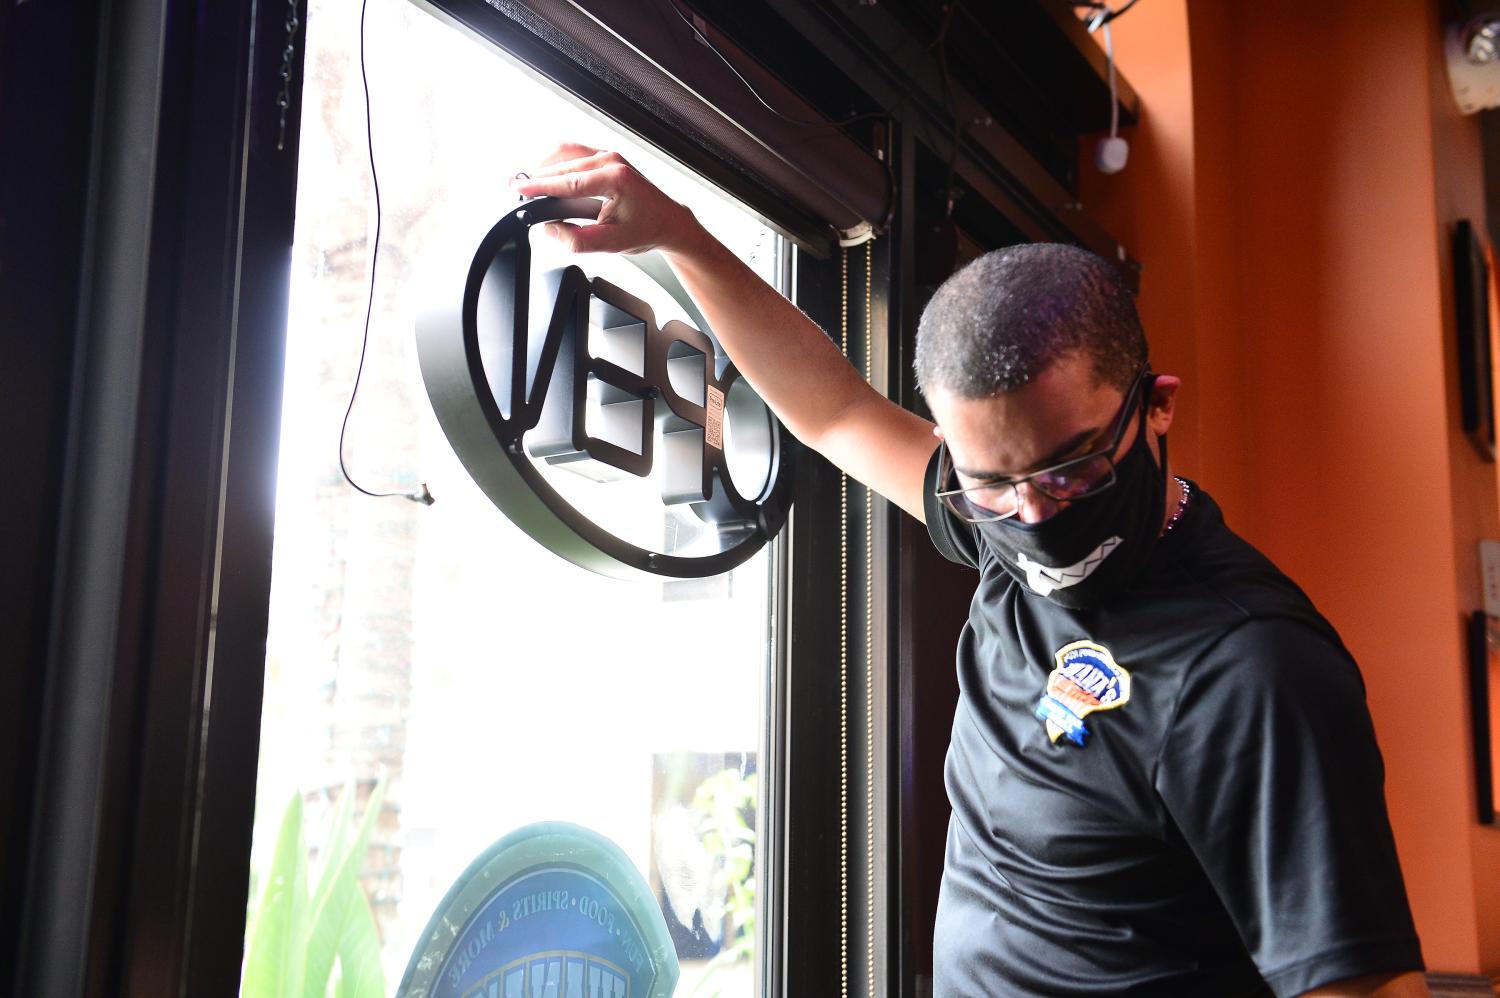 Juana's Latin Sports Bar & Grill employee seen hanging the open sign for re-opens for indoor dining on May 18, 2020 in Miramar, Florida. The six year old family own restaurant with 30 plus employee re-opened approximately two months after shutting it's doors due to the coronavirus pandemic and lost over $300,000 of revenue during that time. Juana's Latin Sports Bar & Grill just received a PPP loan approval on May 6 and looking for most of they employee to come back to work. as Broward County starts the first phase of the states coronavirus pandemic re-opening plan, which includes openings with certain restrictions of businesses like barber shops, hair salon, restaurants and retail stores. (Photo by JL/Sipa USA)No Use UK. No Use Germany.